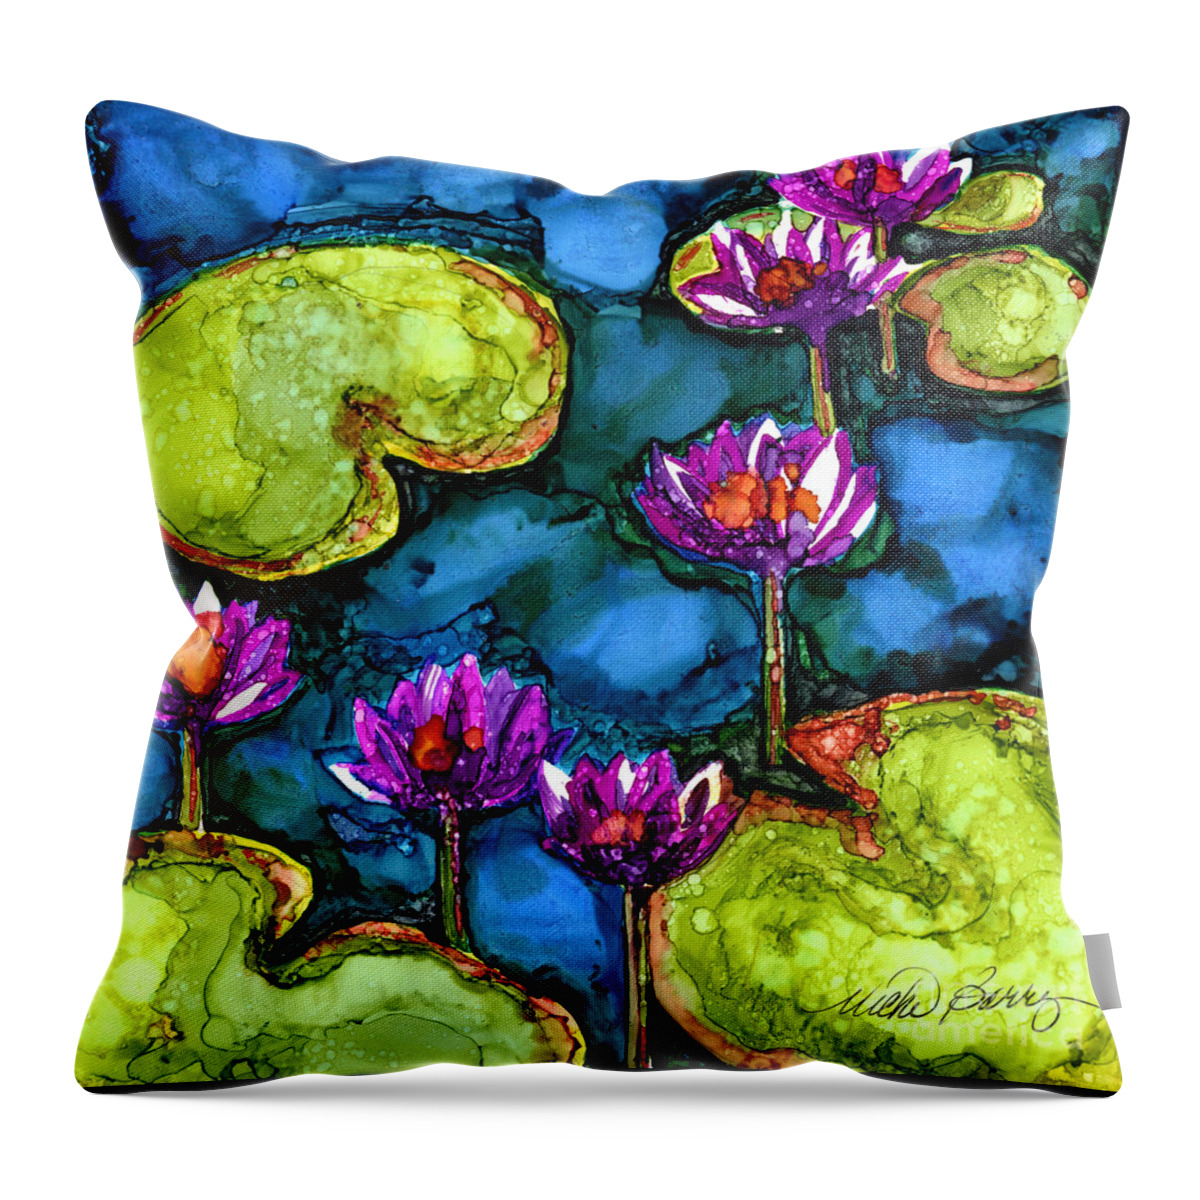 Water Lilies Throw Pillow featuring the painting Water Lilies II #1 by Vicki Baun Barry